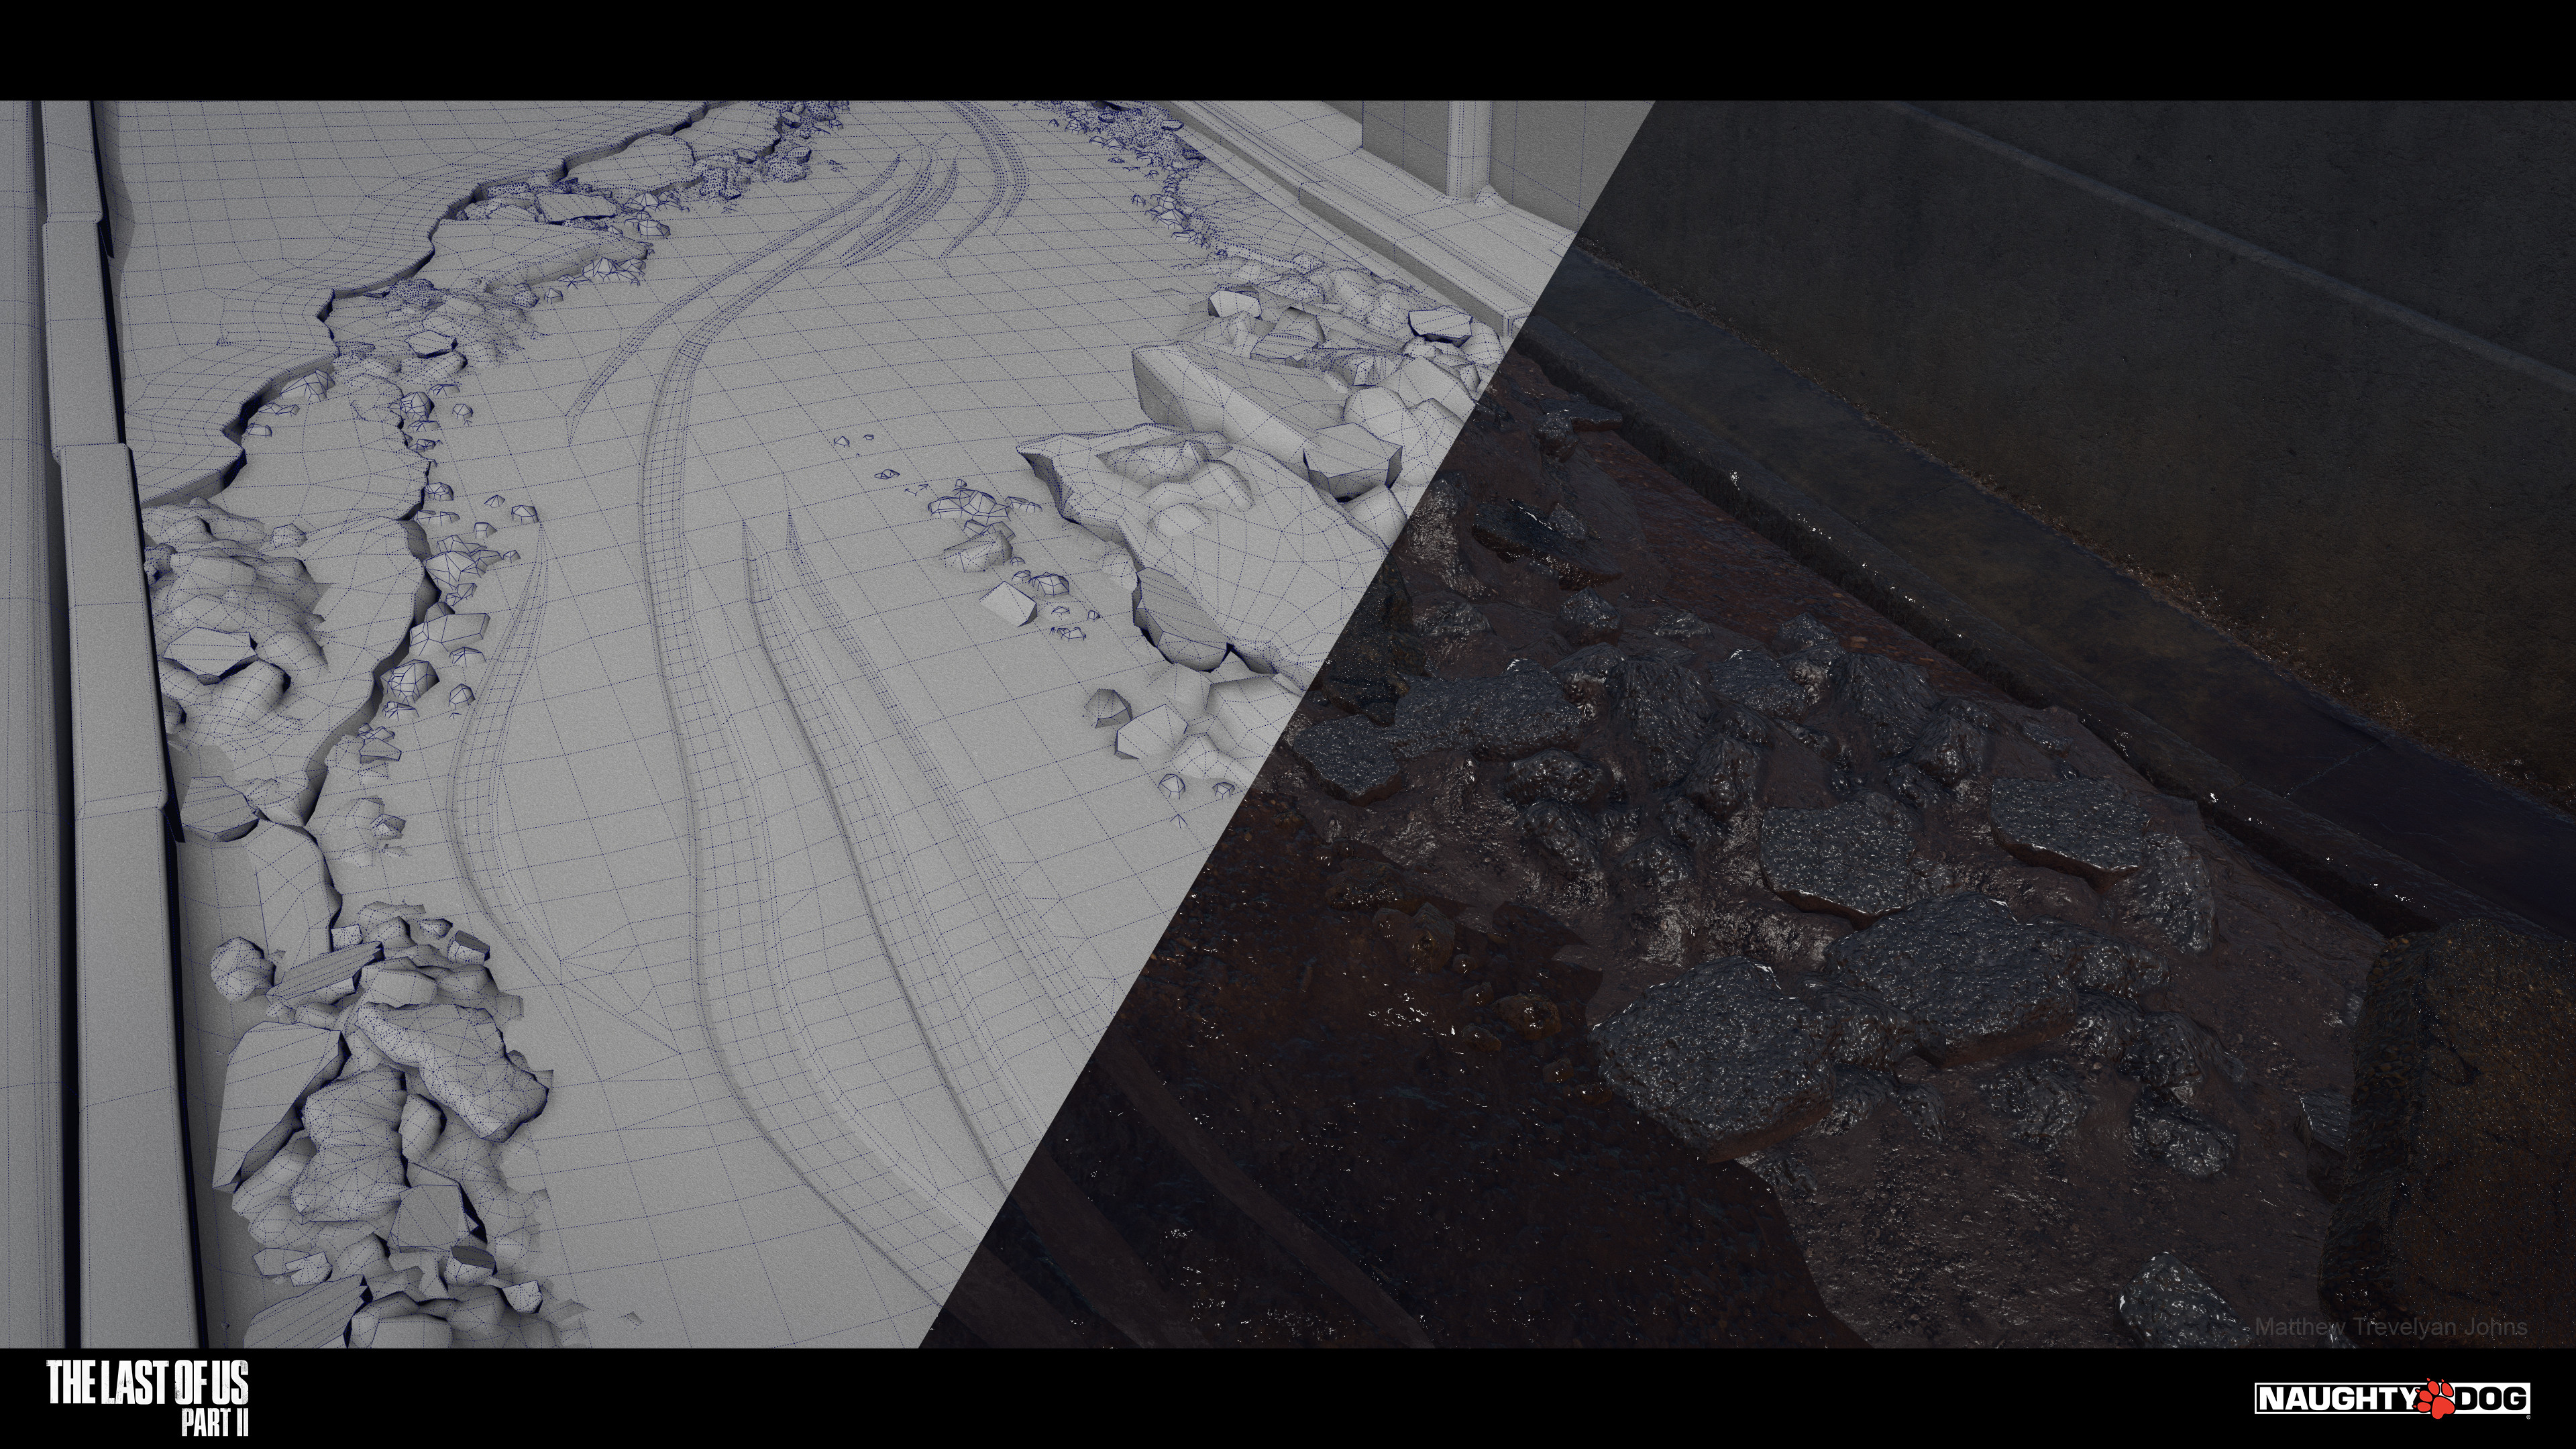 Here are some wireframe shots, I imagined the broken water pipes at some point breaking, flooding the parking garage and eroding the asphalt so that it would break away, sliding down the slope revealing the earth beneath...